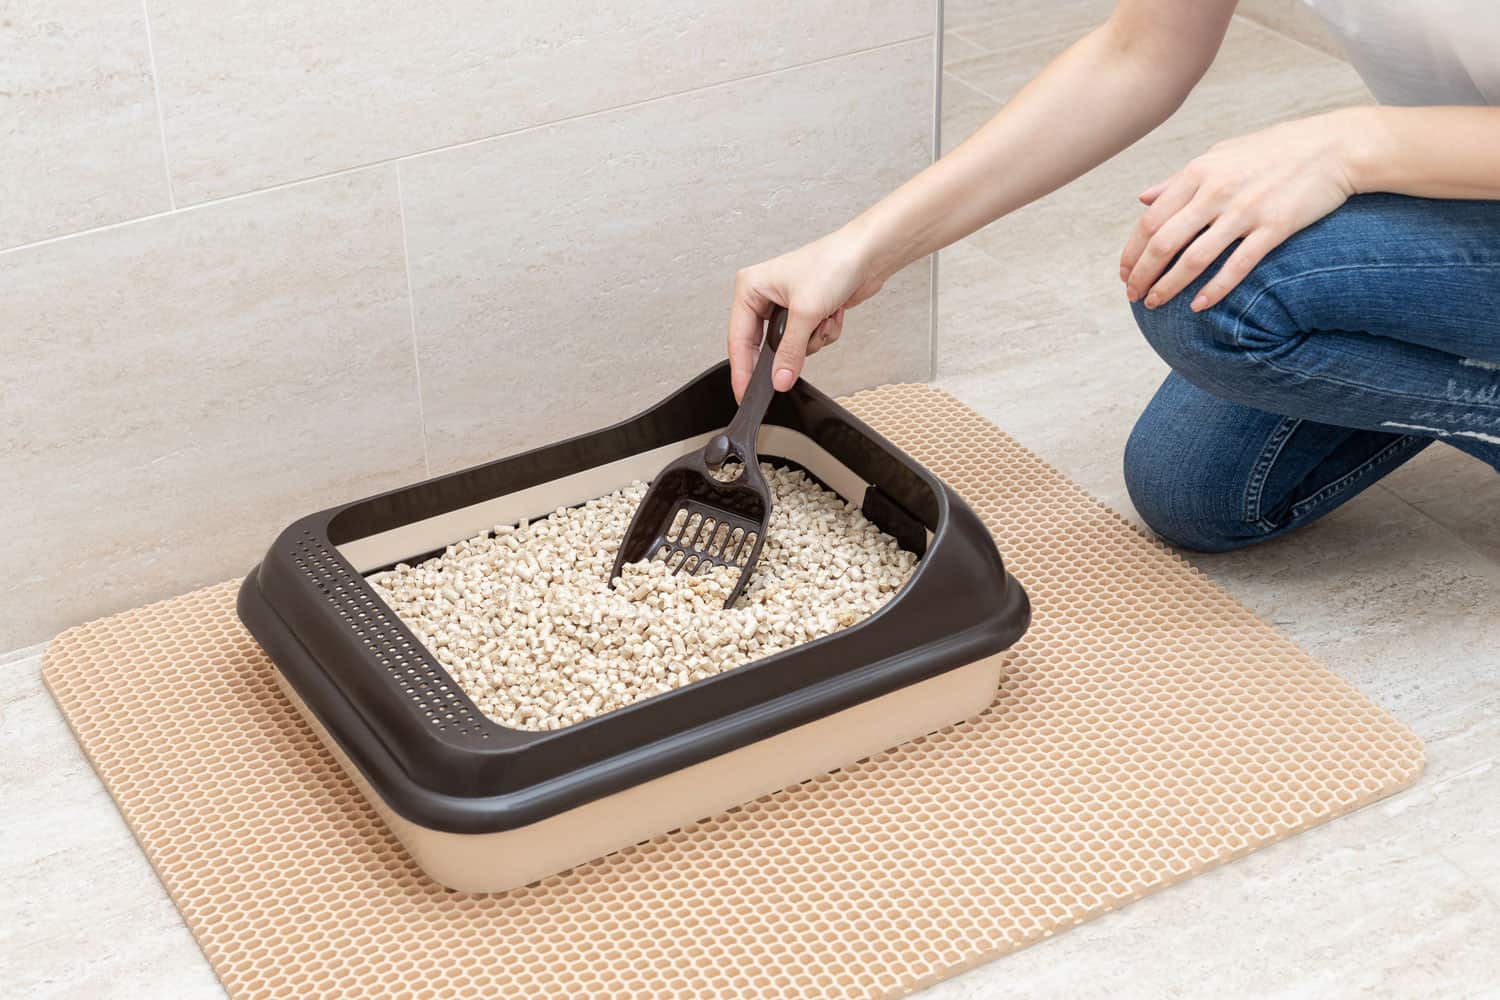 Cleaning the cat litter box using a special scoop